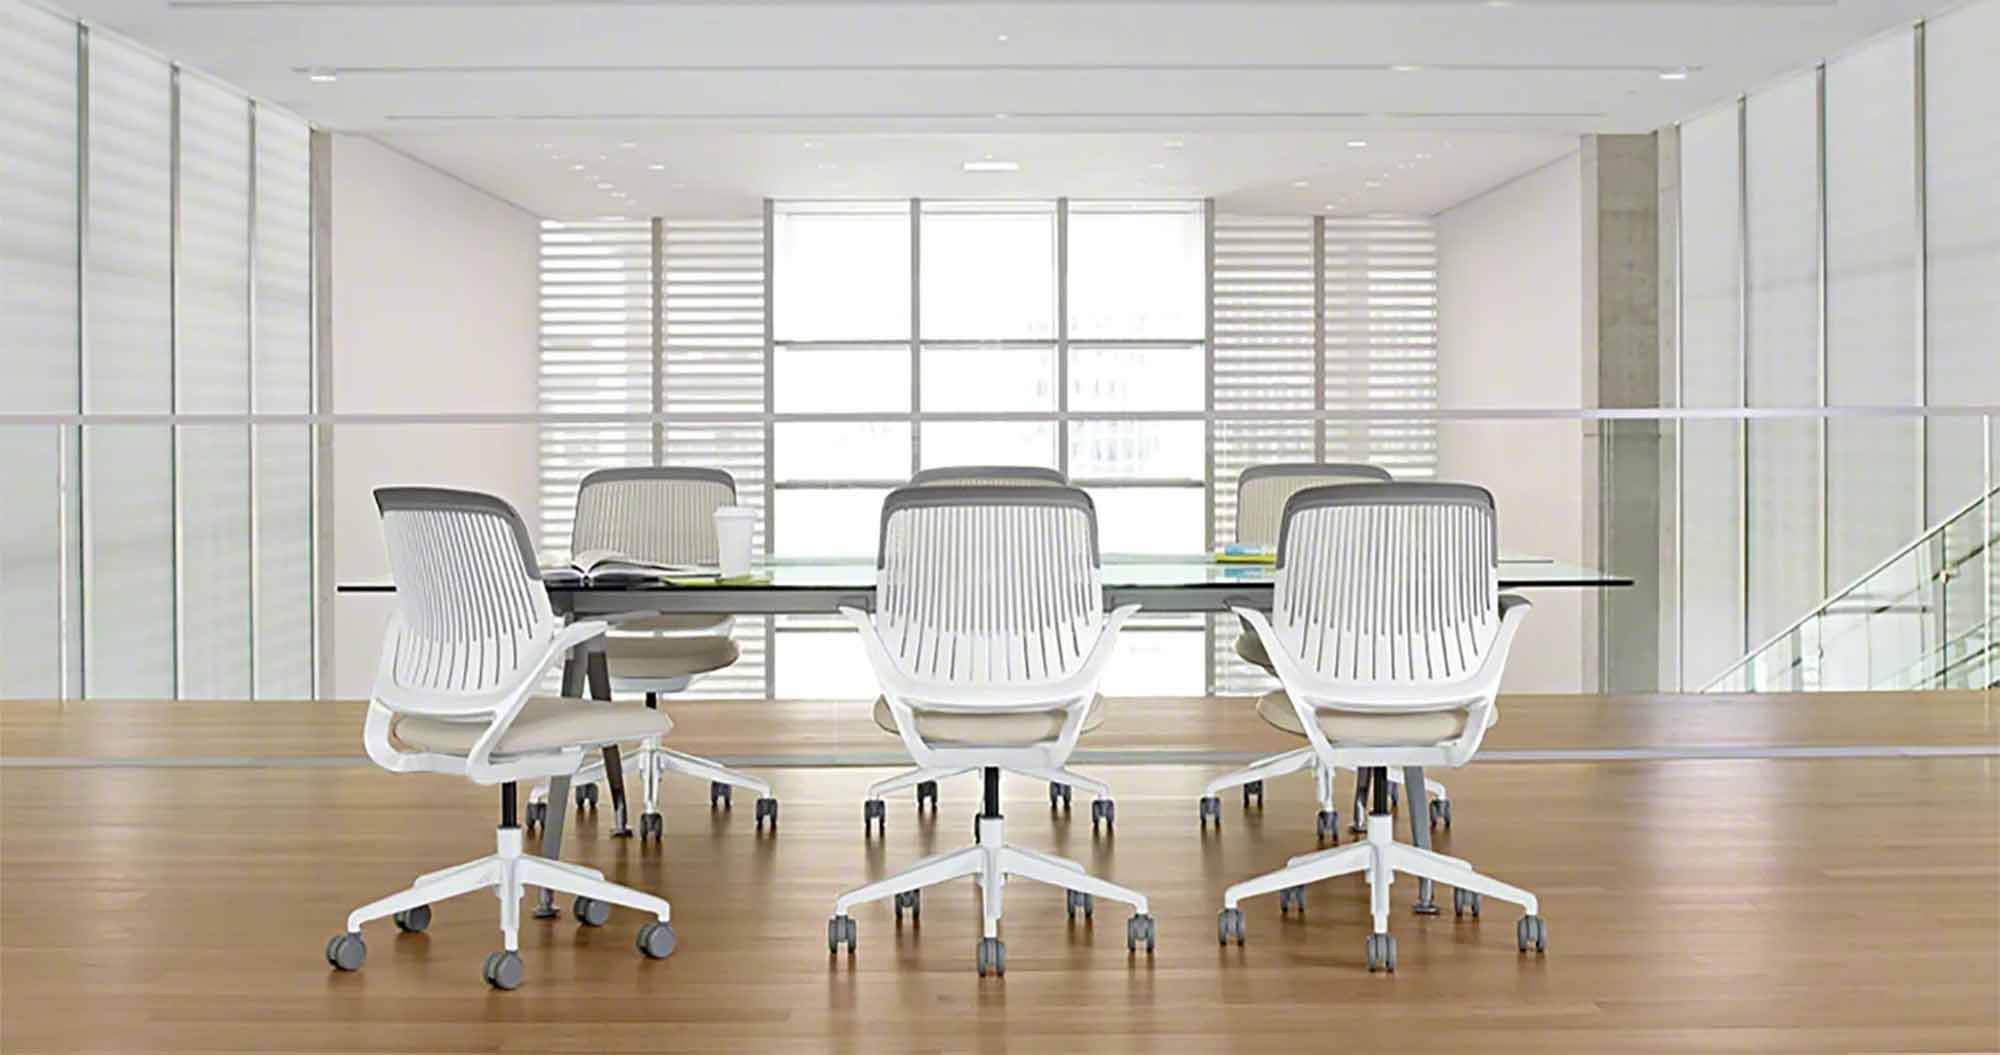 Refurbished Steelcase Office Chairs Are Worth the Investment